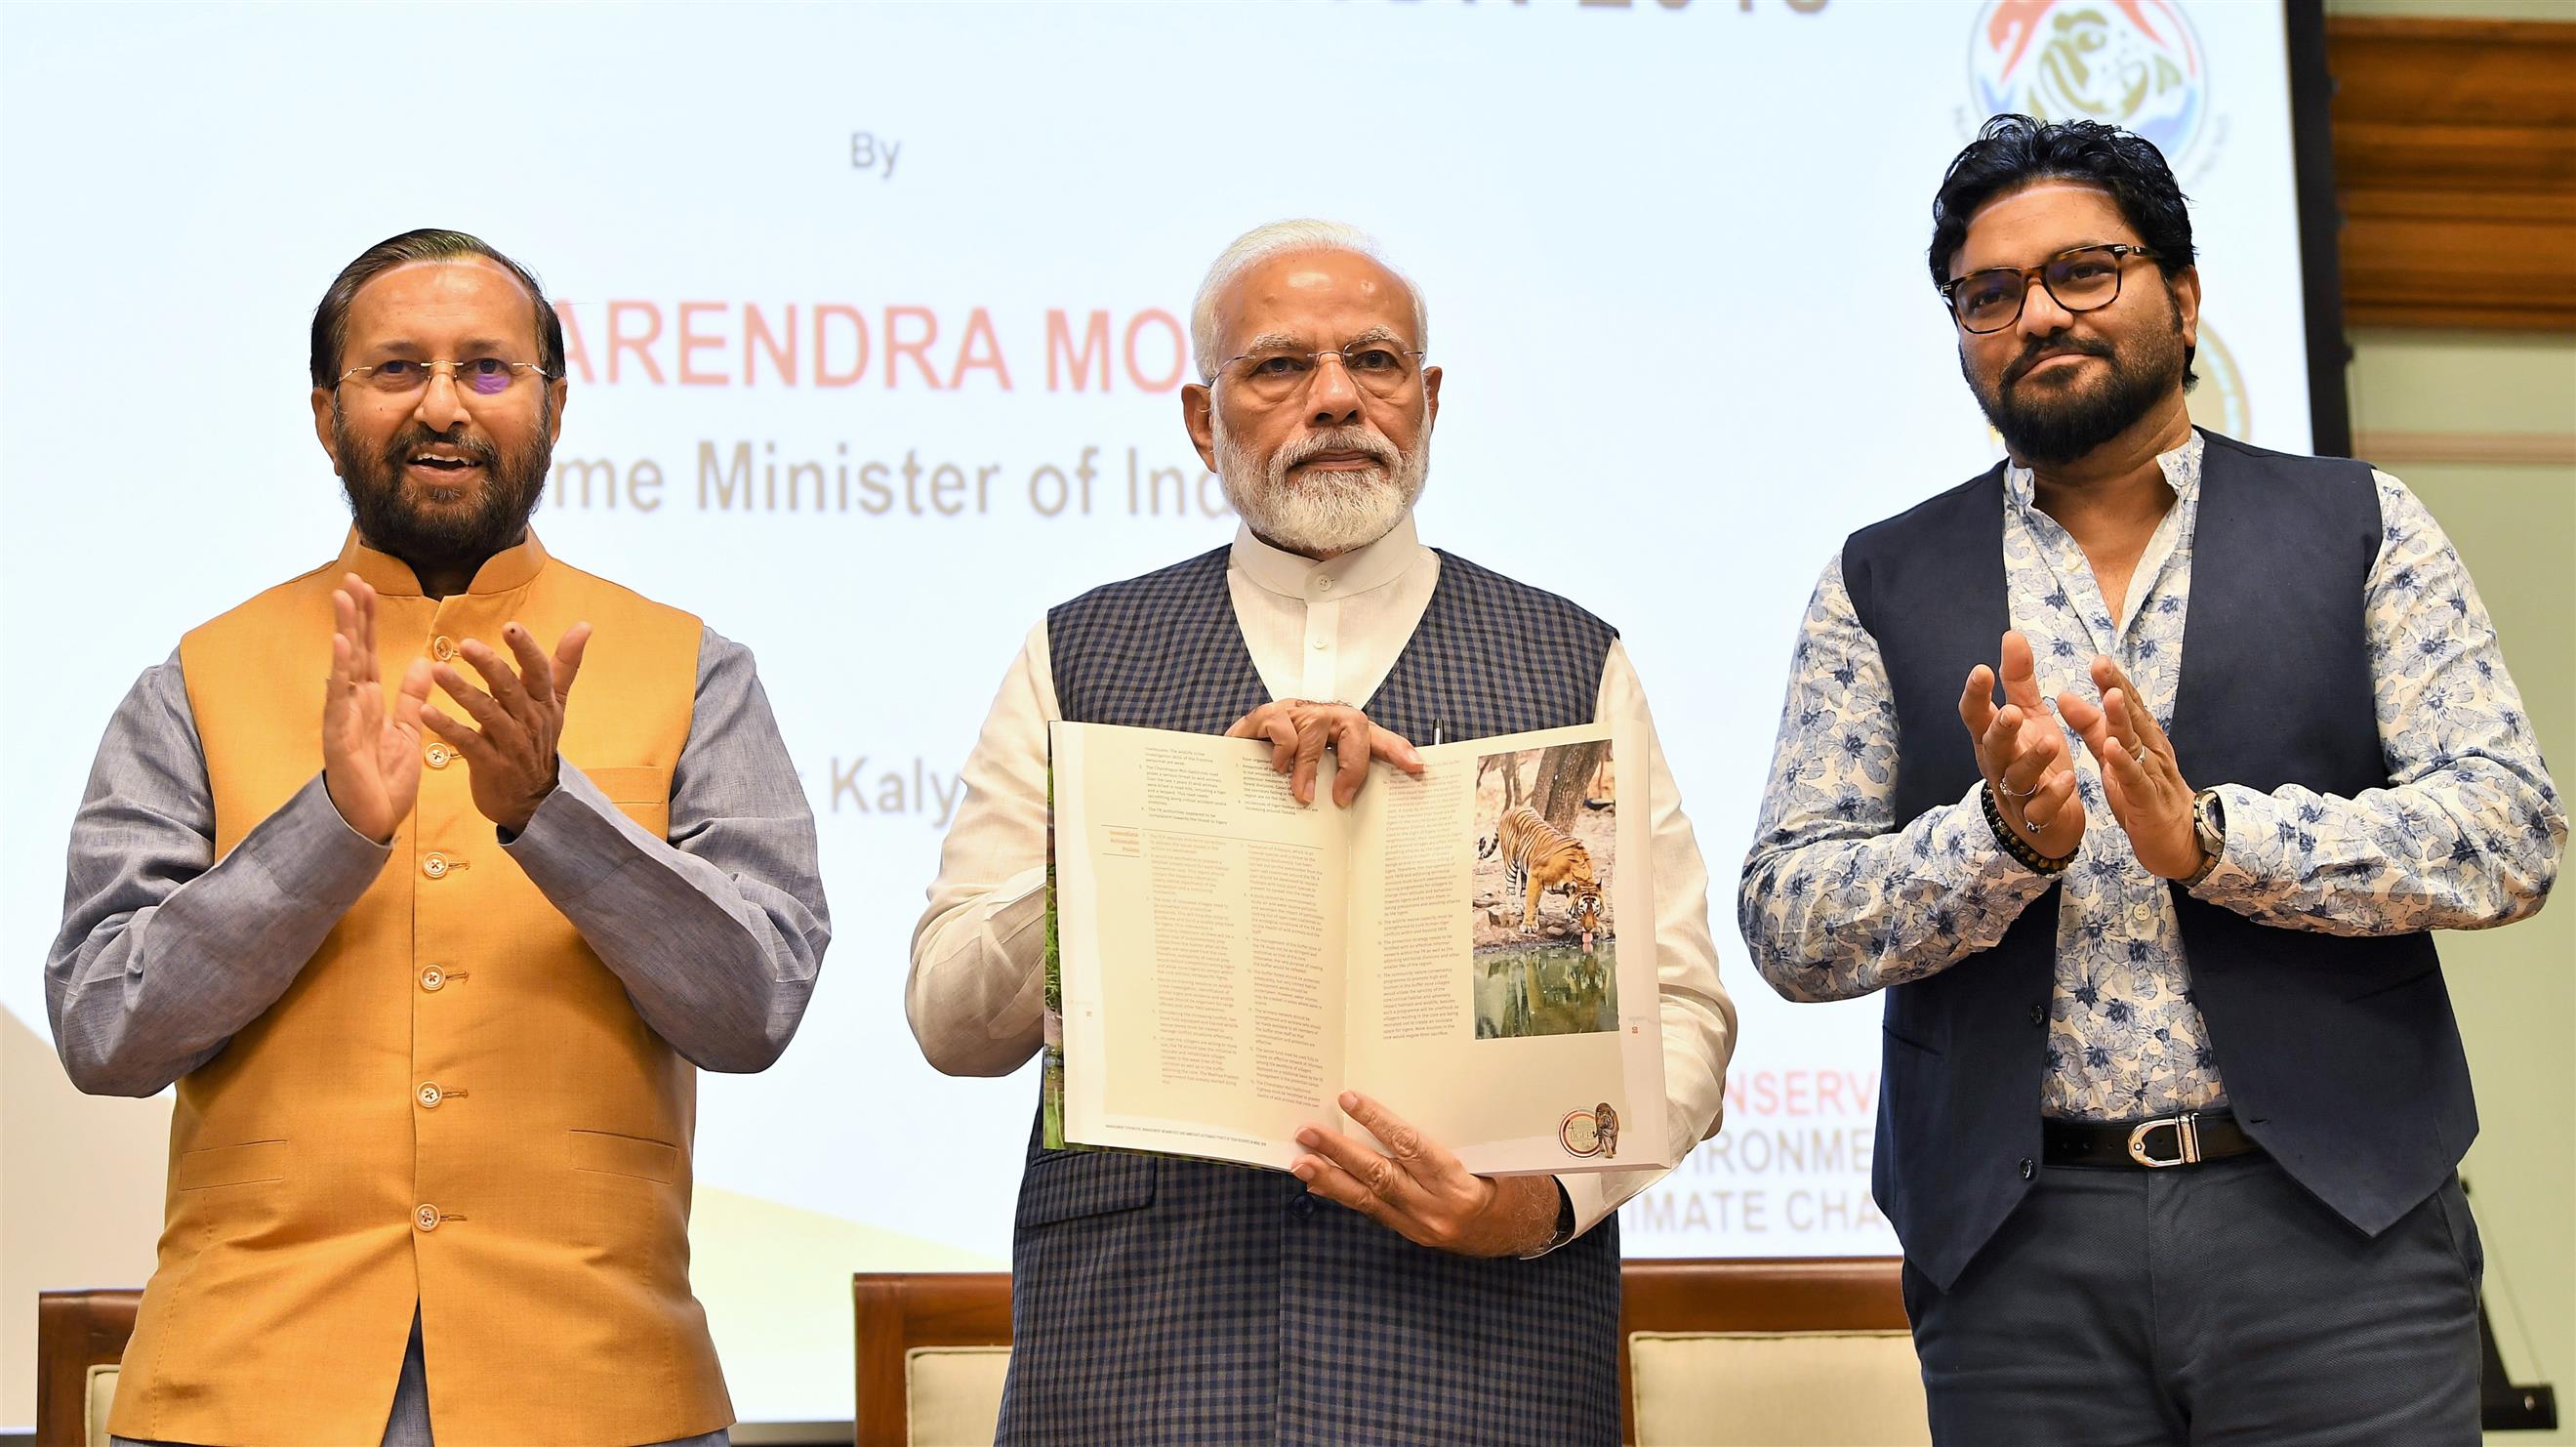 The Prime Minister, Shri Narendra Modi releasing the results of 4th cycle of All India Tiger Estimation – 2018, on the occasion of the Global Tiger Day, in New Delhi on July 29, 2019. The Union Minister for Environment, Forest & Climate Change and Information & Broadcasting, Shri Prakash Javadekar and the Minister of State for Environment, Forest and Climate Change, Shri Babul Supriyo are also seen. 